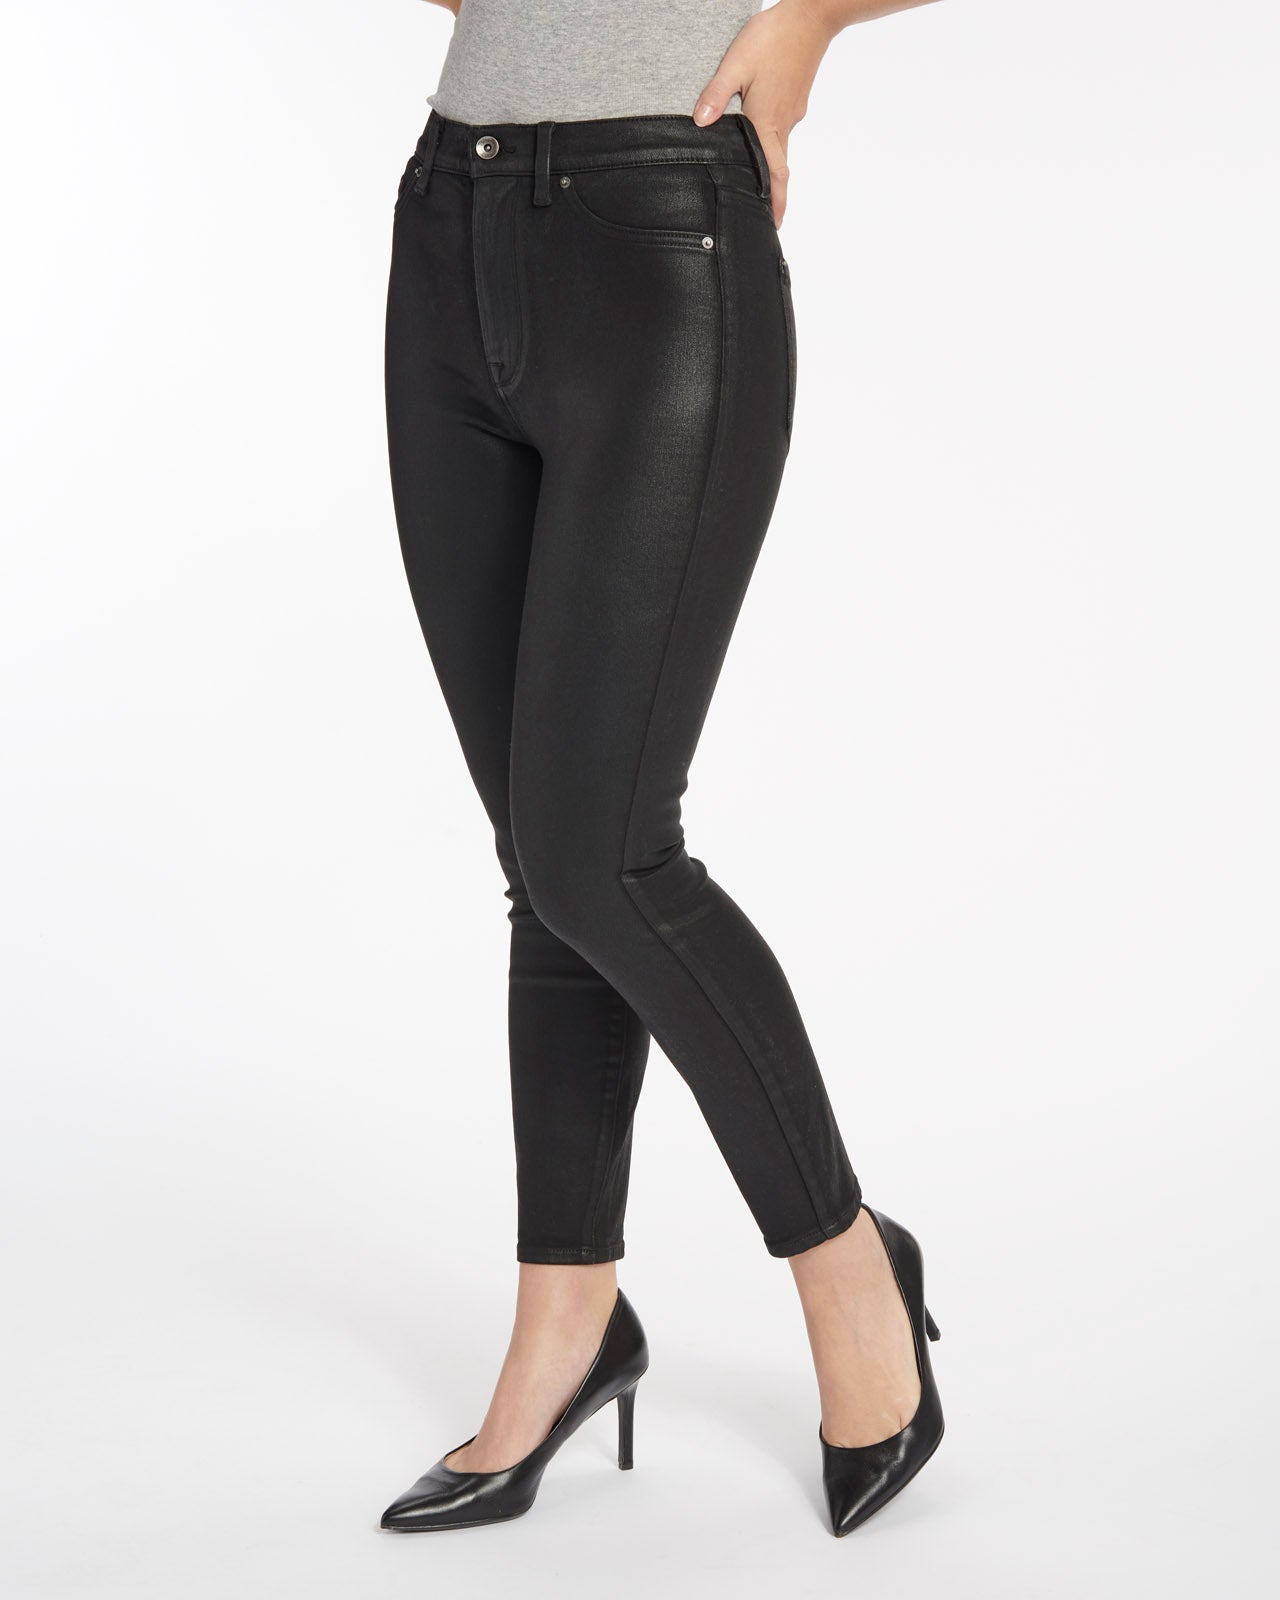 7 For All Mankind Ultra High Rise Skinny Bootcut Jeans in Coated Black